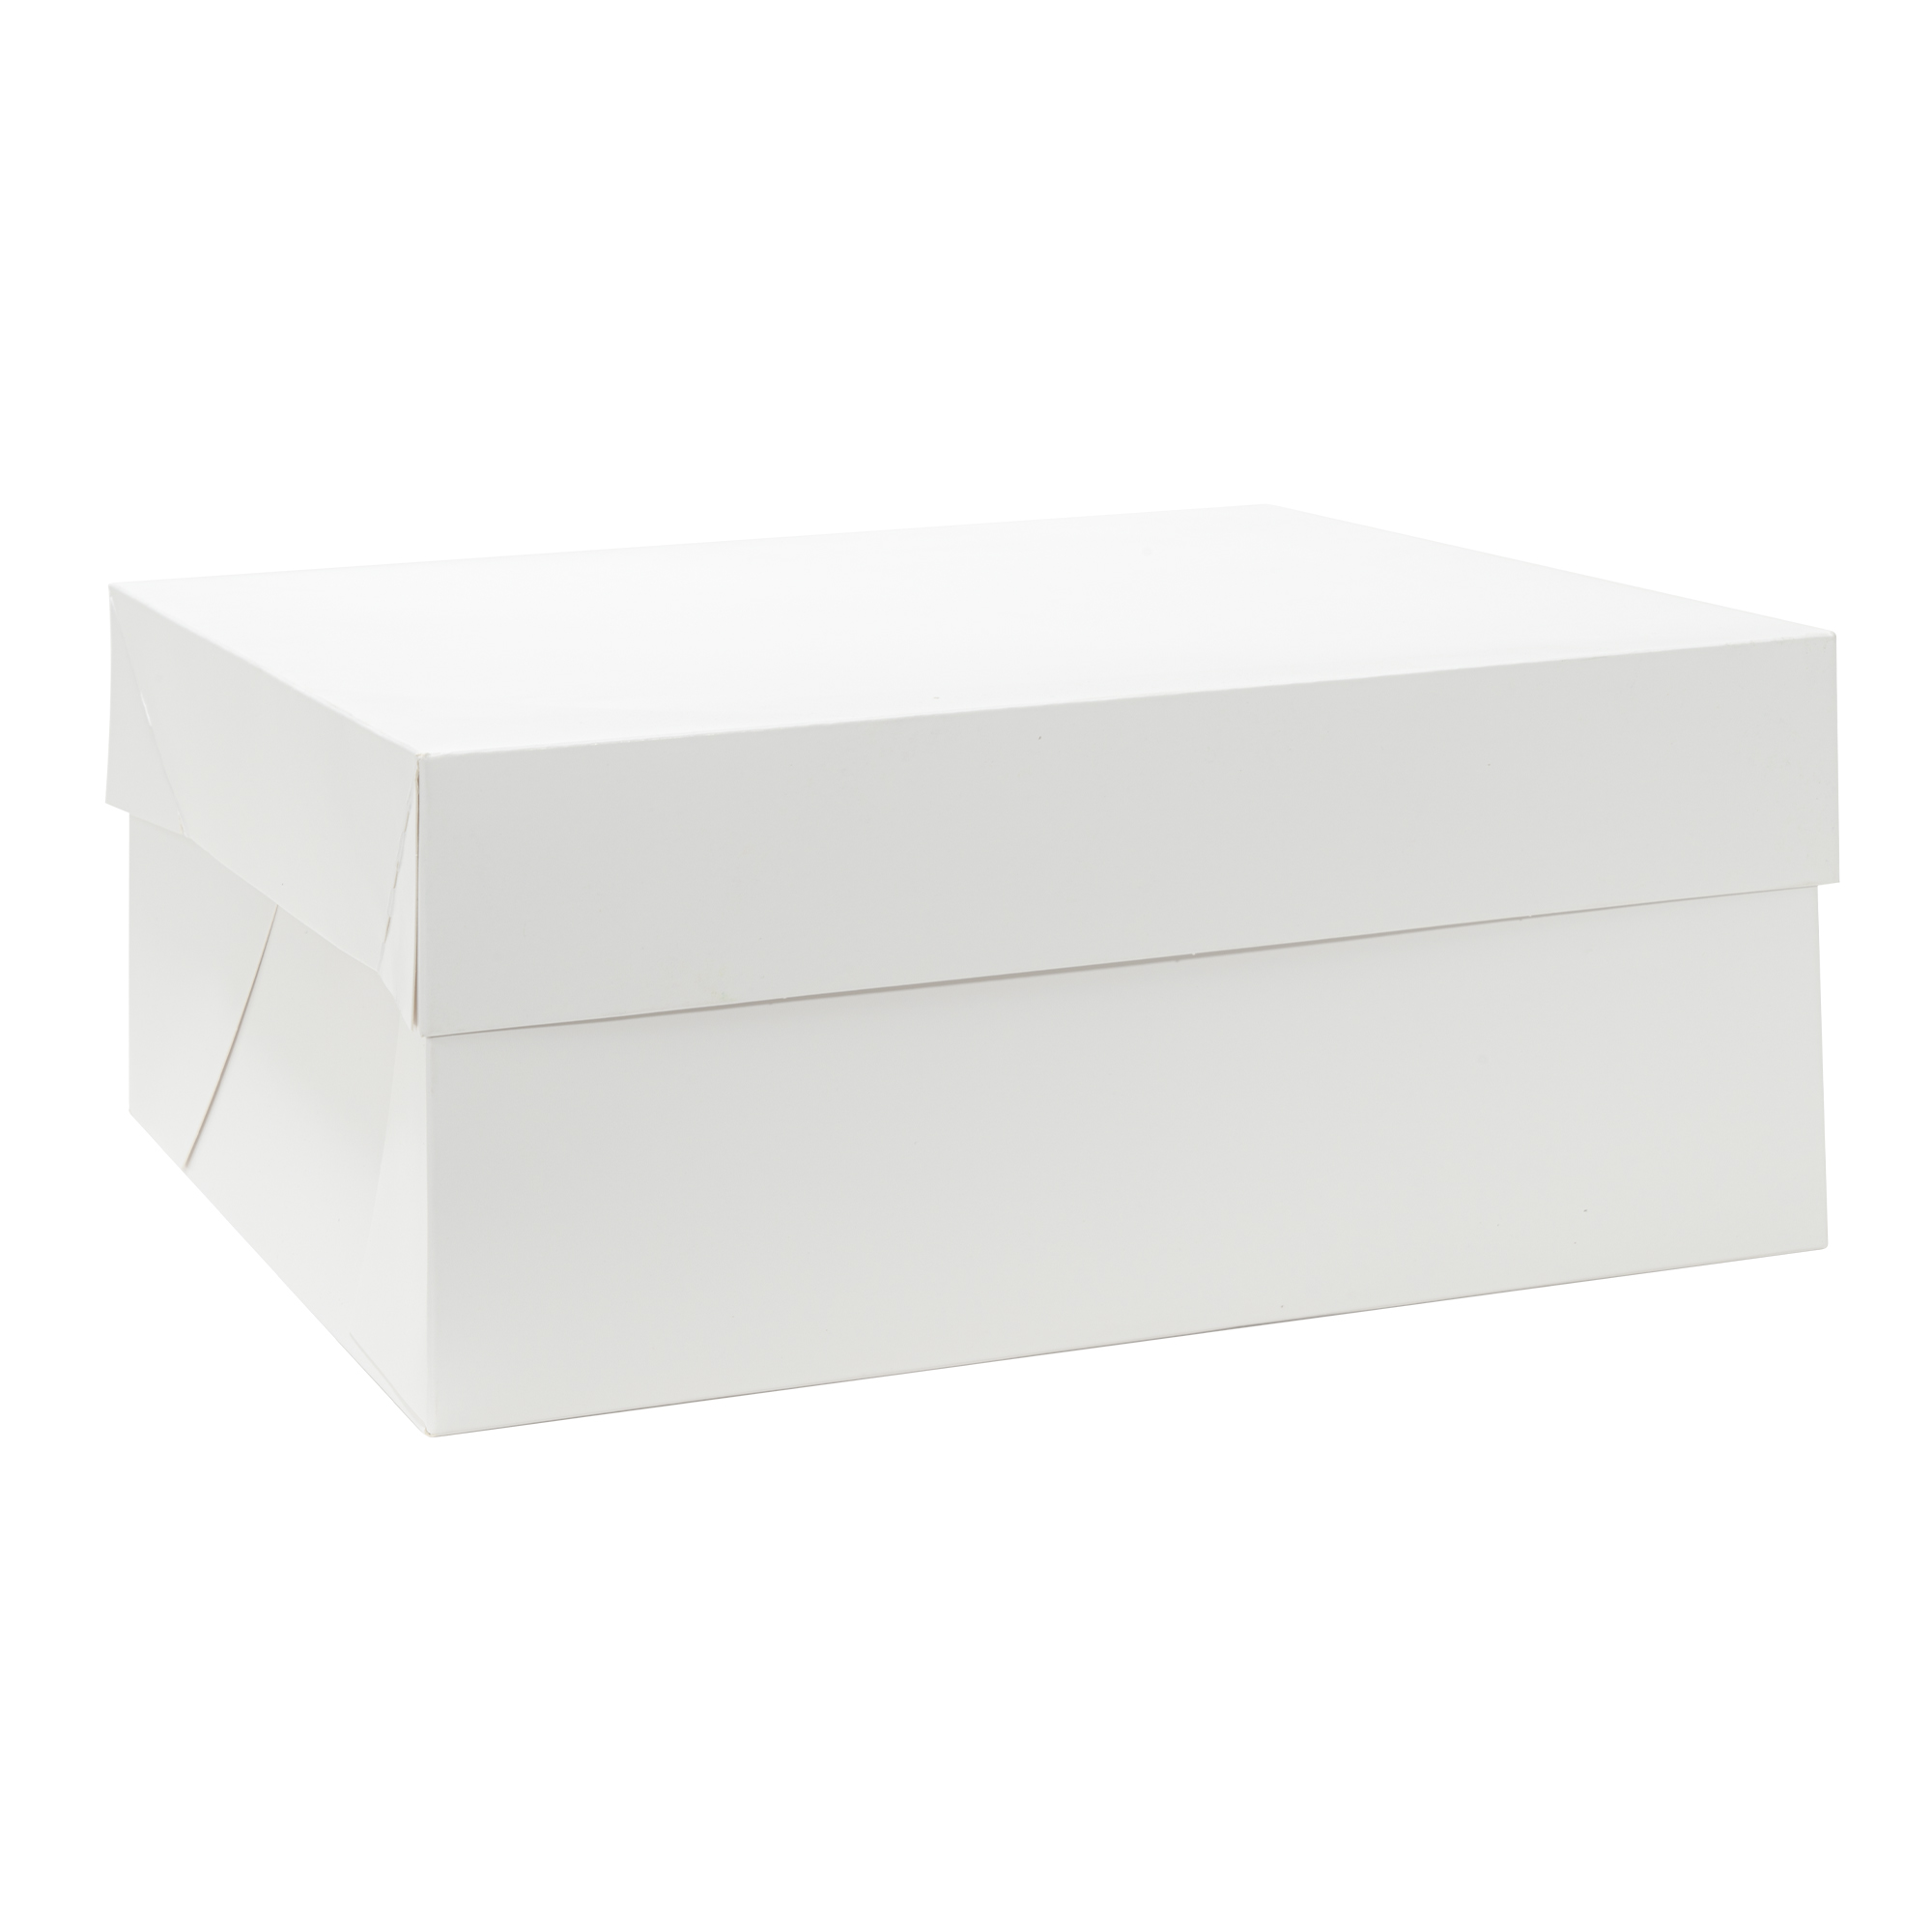 2-Piece Bakery Box With Lid 12" 25pc/pack - White